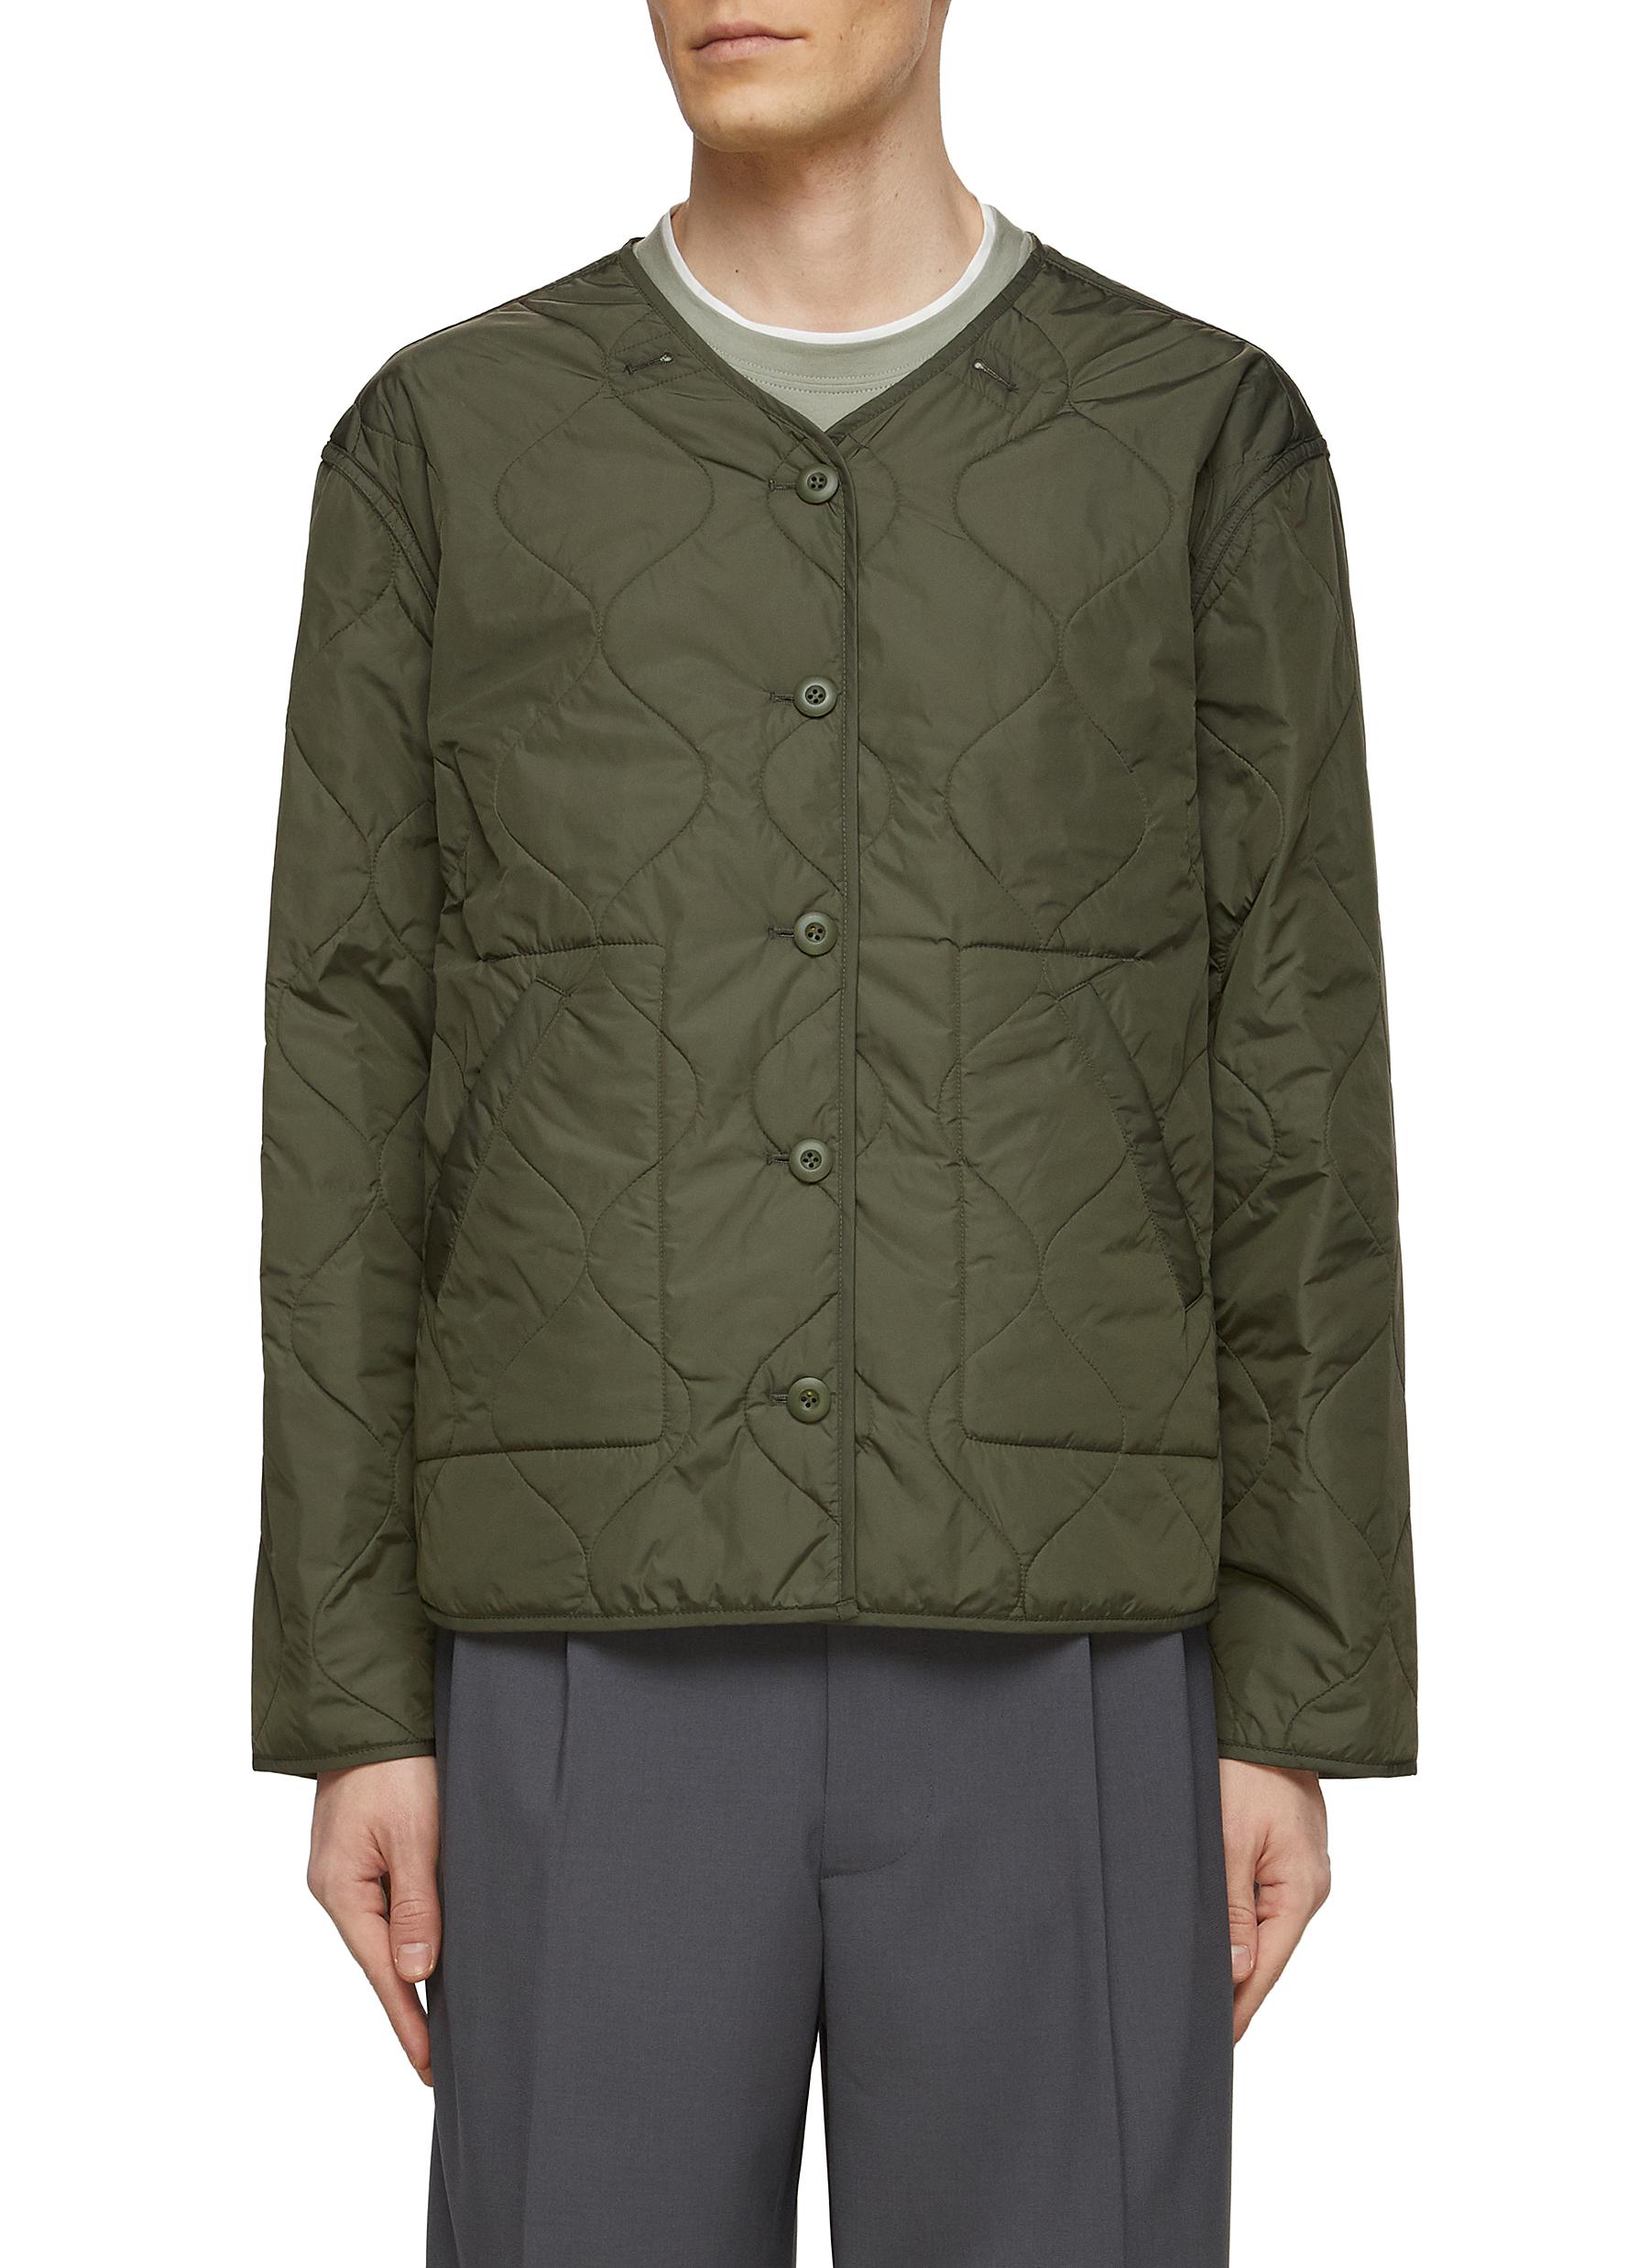 OFFICINE GENERALE ‘CODY' REVERSIBLE BUTTON FRONT STYLE QUILTED NYLON JACKET